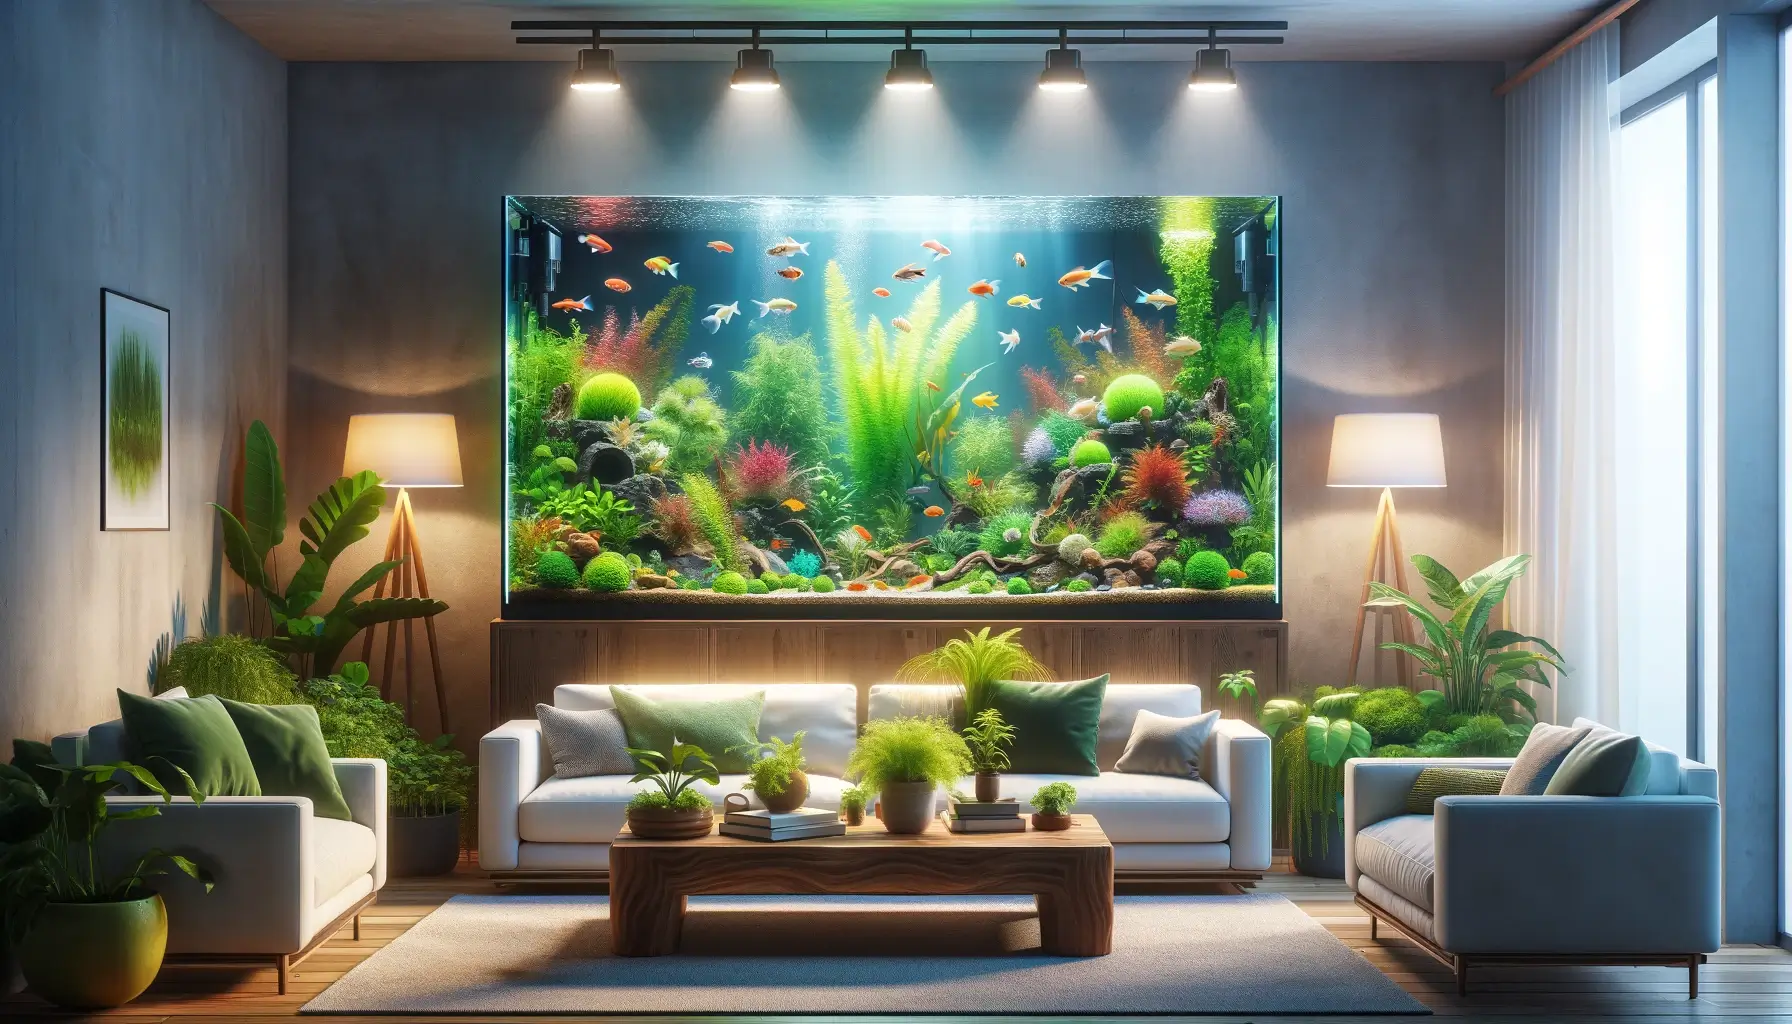 An inviting living room centered around a large, vibrant freshwater aquarium full of colorful fish and lush aquatic plants, creating a peaceful and harmonious indoor oasis.